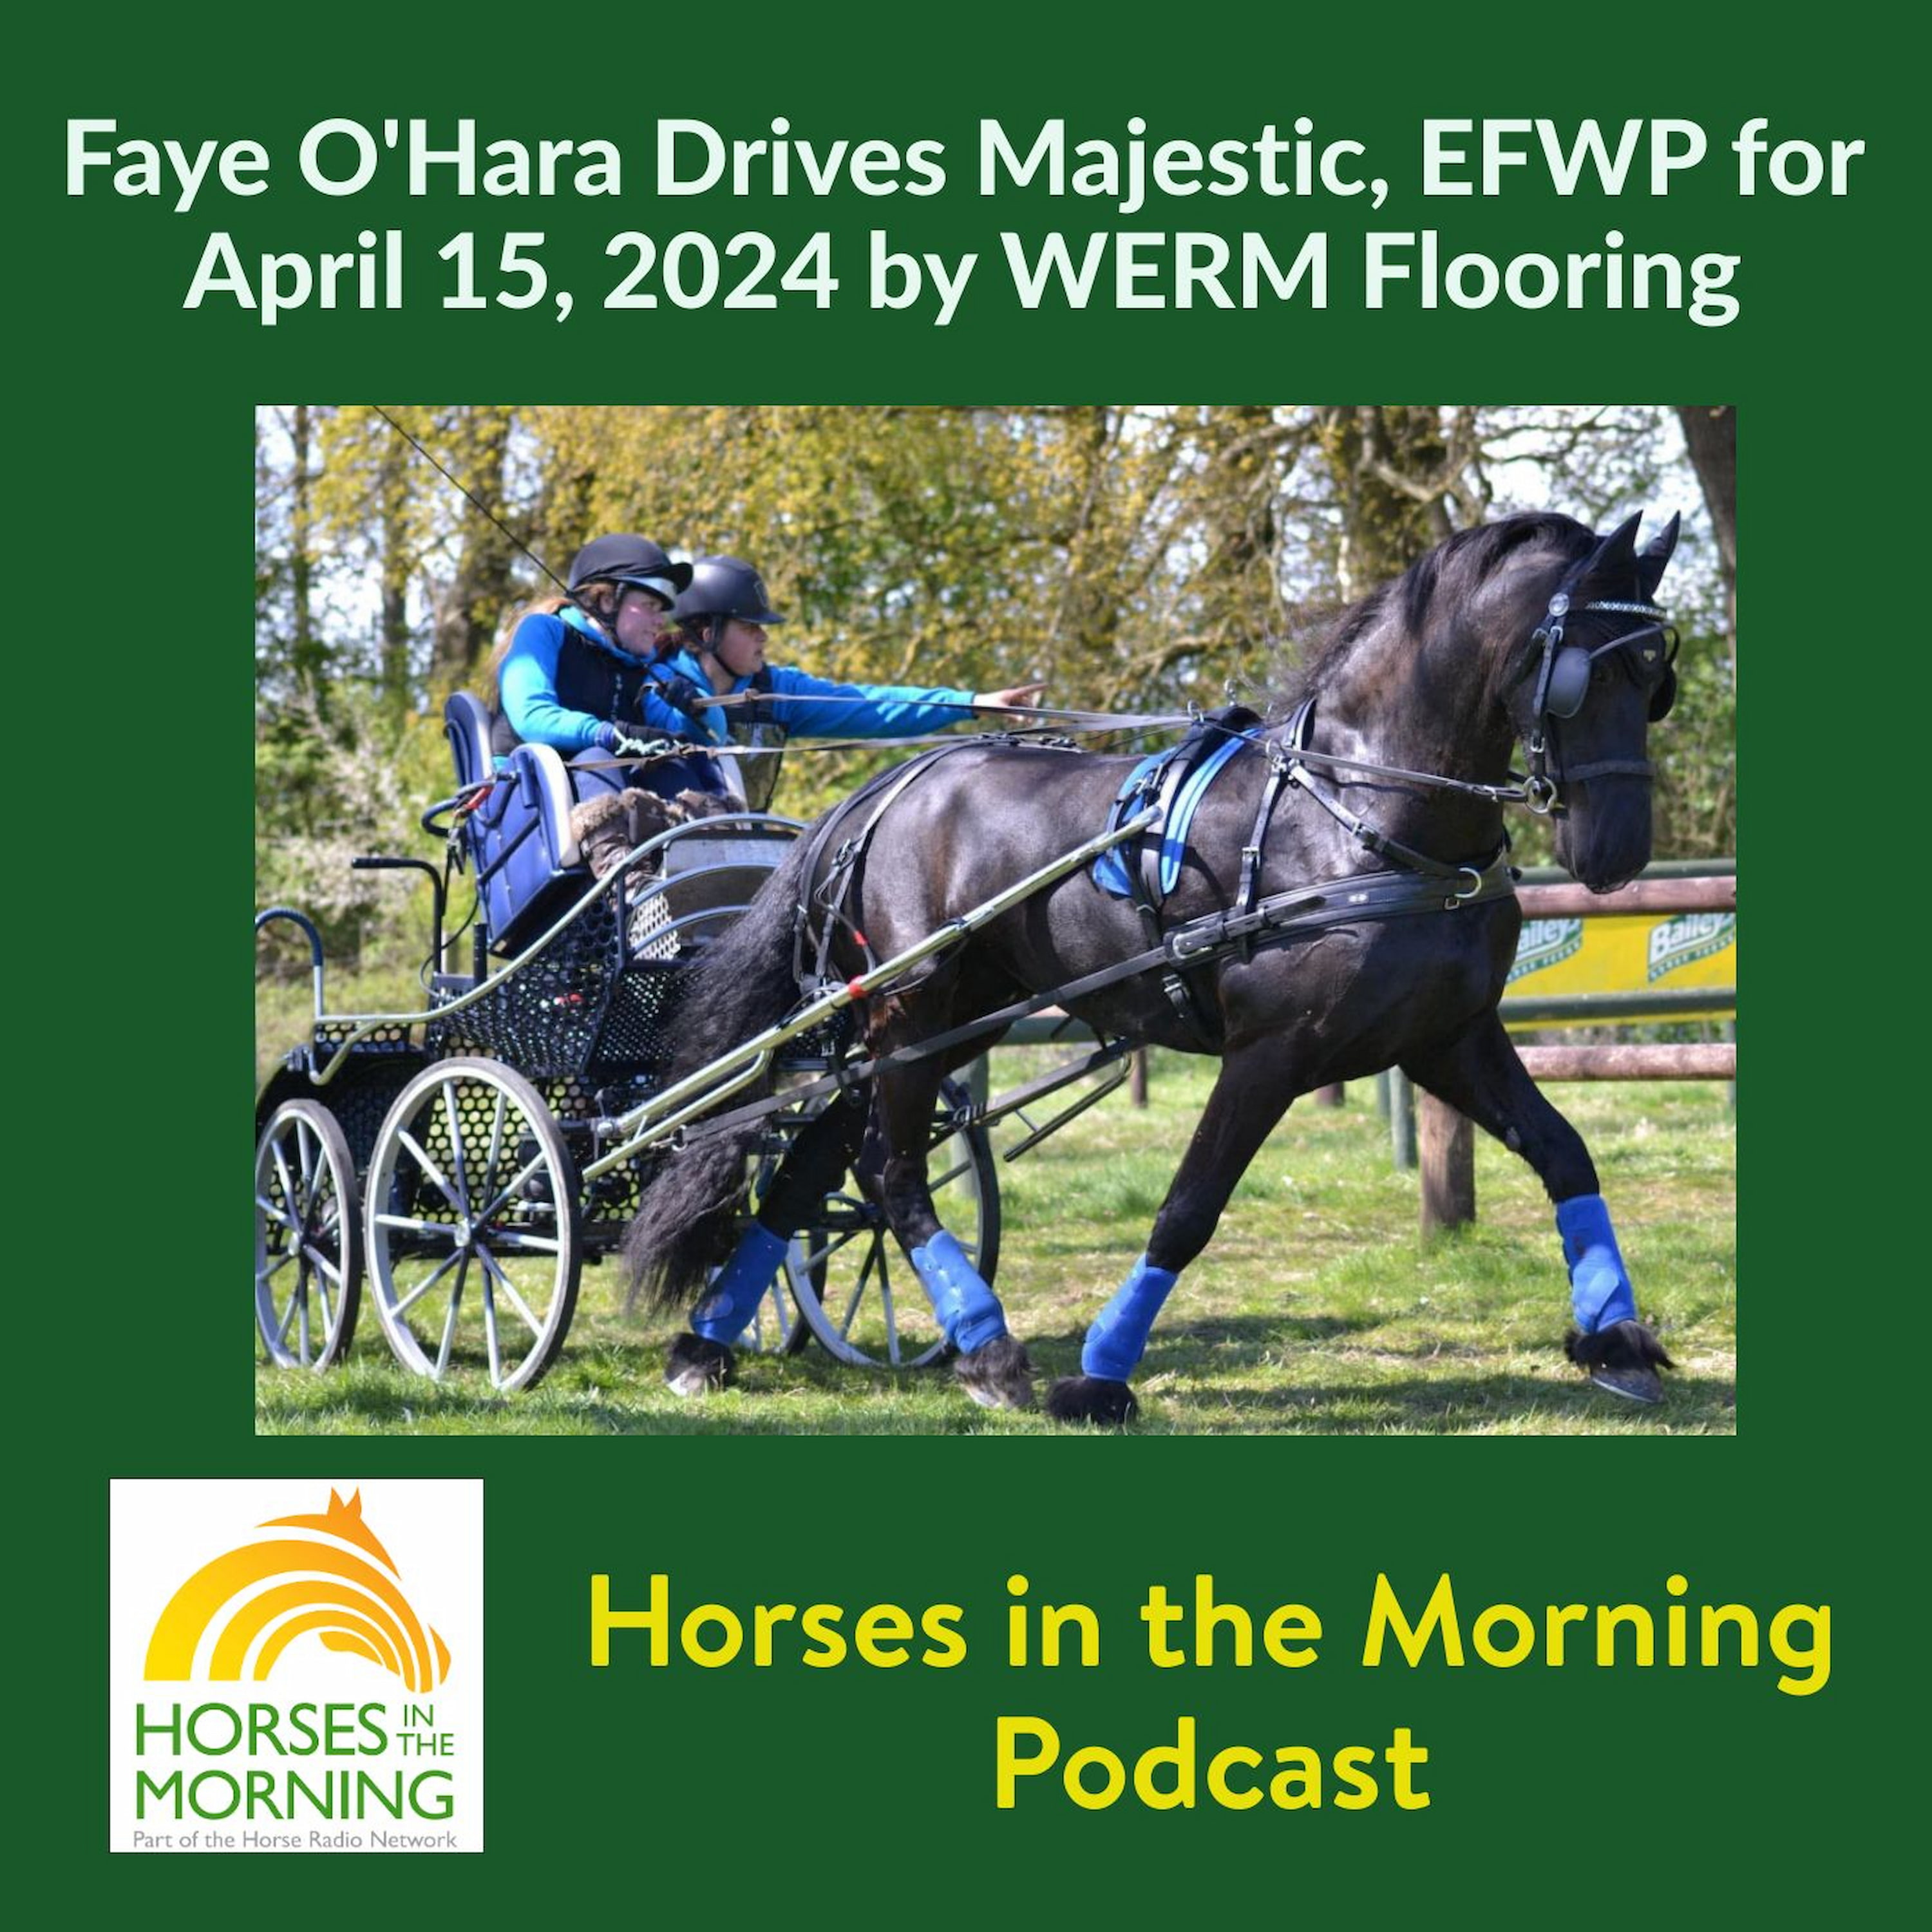 Faye O'Hara Drives Majestic, EFWP for April 15, 2024 by WERM Flooring